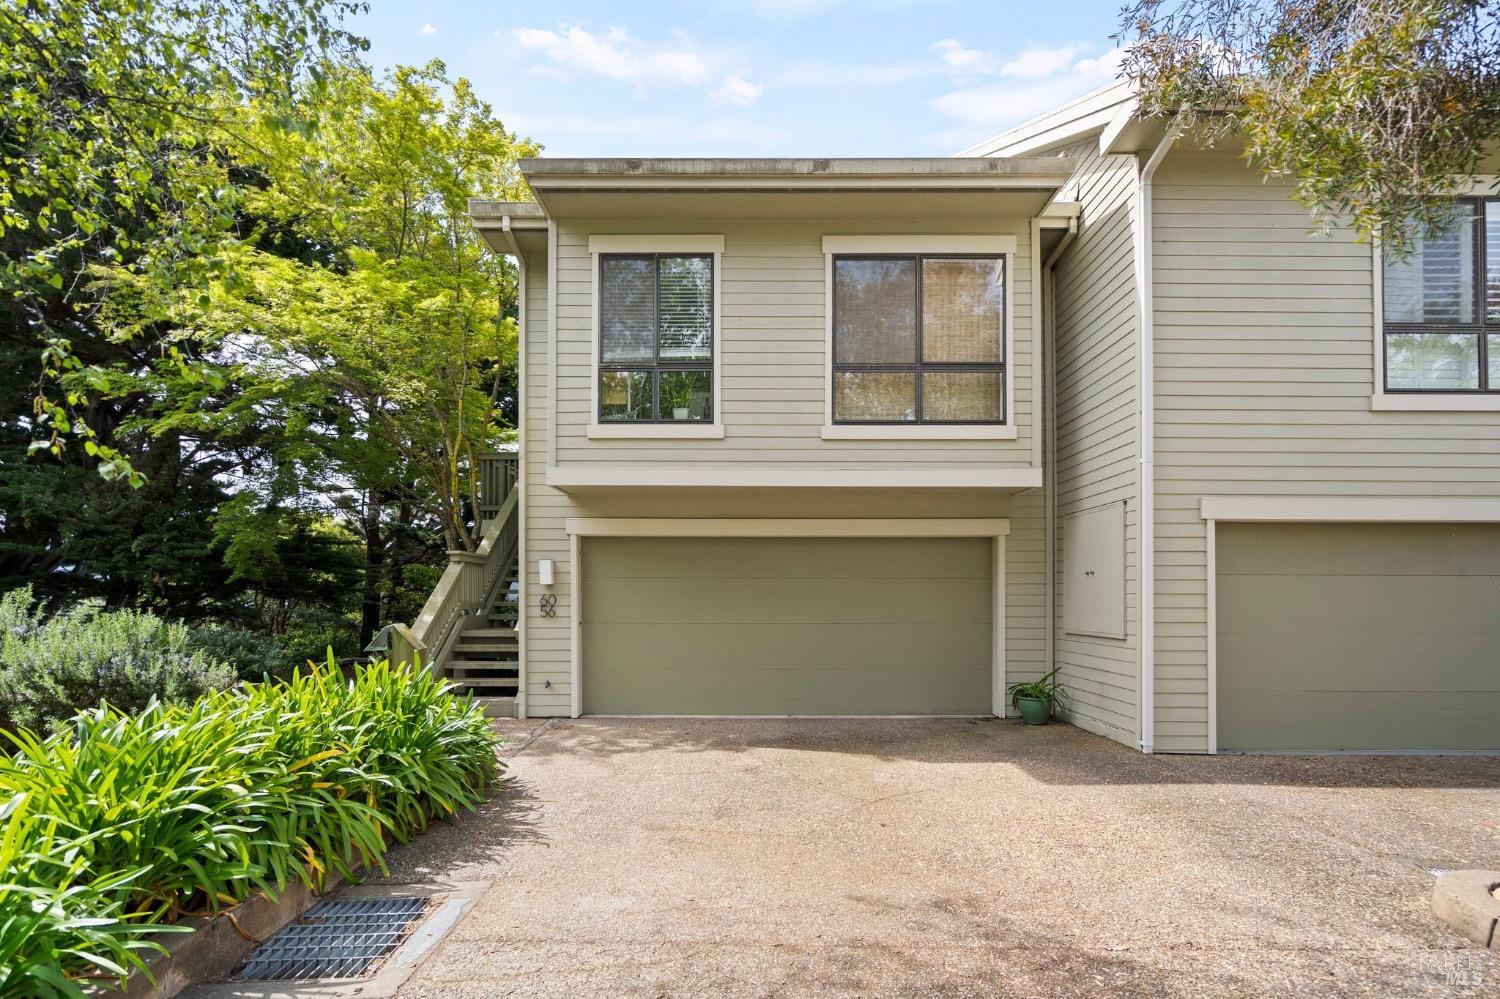 Welcome to 56 Eucalyptus Knoll Street! Enter through your 2 car garage that opens to the main living level.